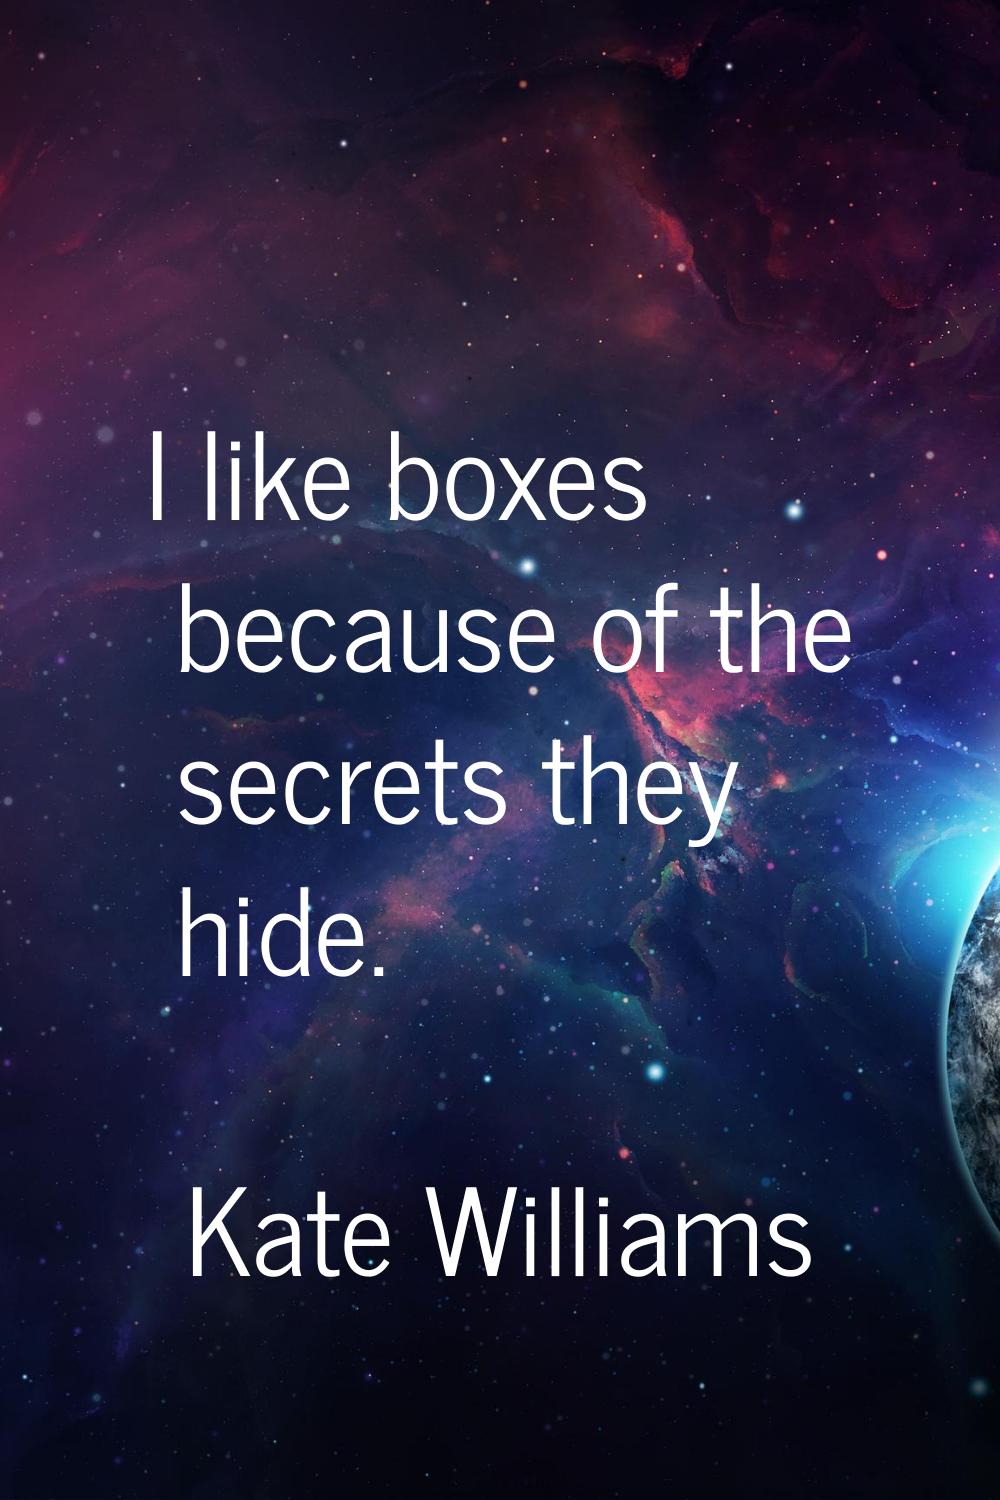 I like boxes because of the secrets they hide.